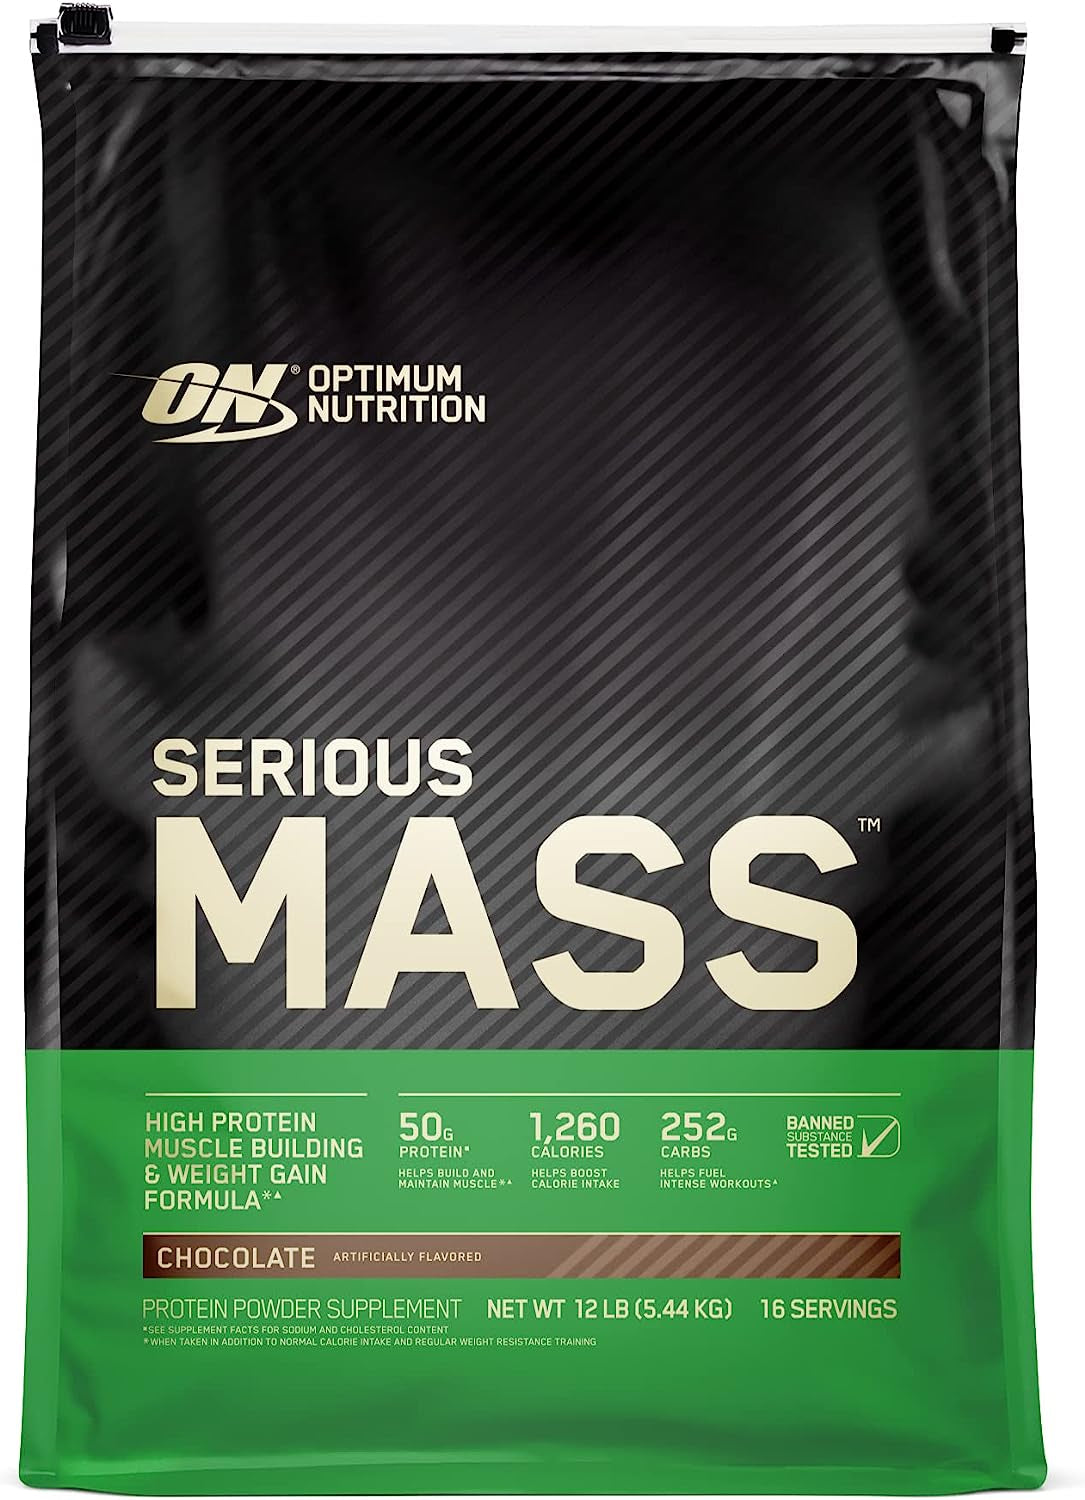 Serious Mass Weight Gainer Protein Powder, Vitamin C, Zinc and Vitamin D for Immune Support, Chocolate, 12 Pound (Packaging May Vary)